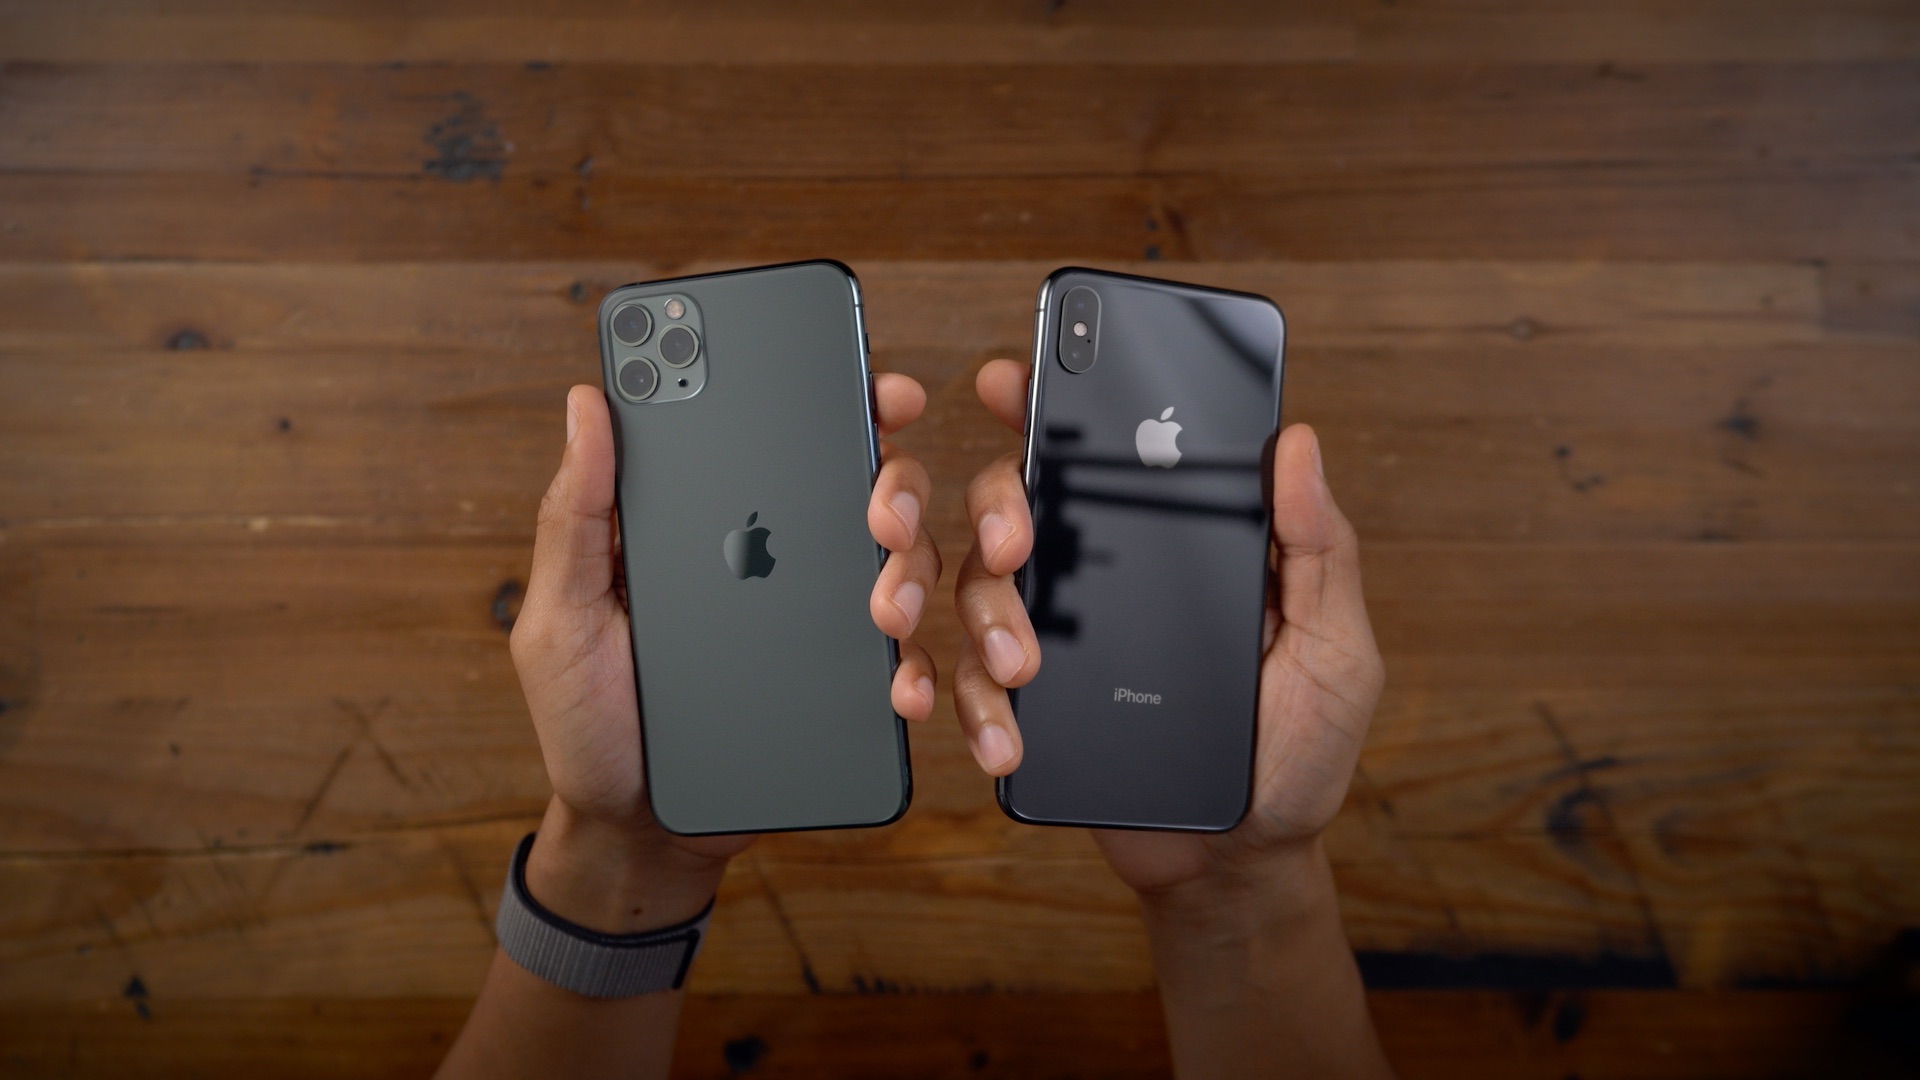 iPhone 11 Pro Max review: what's it like on the other side